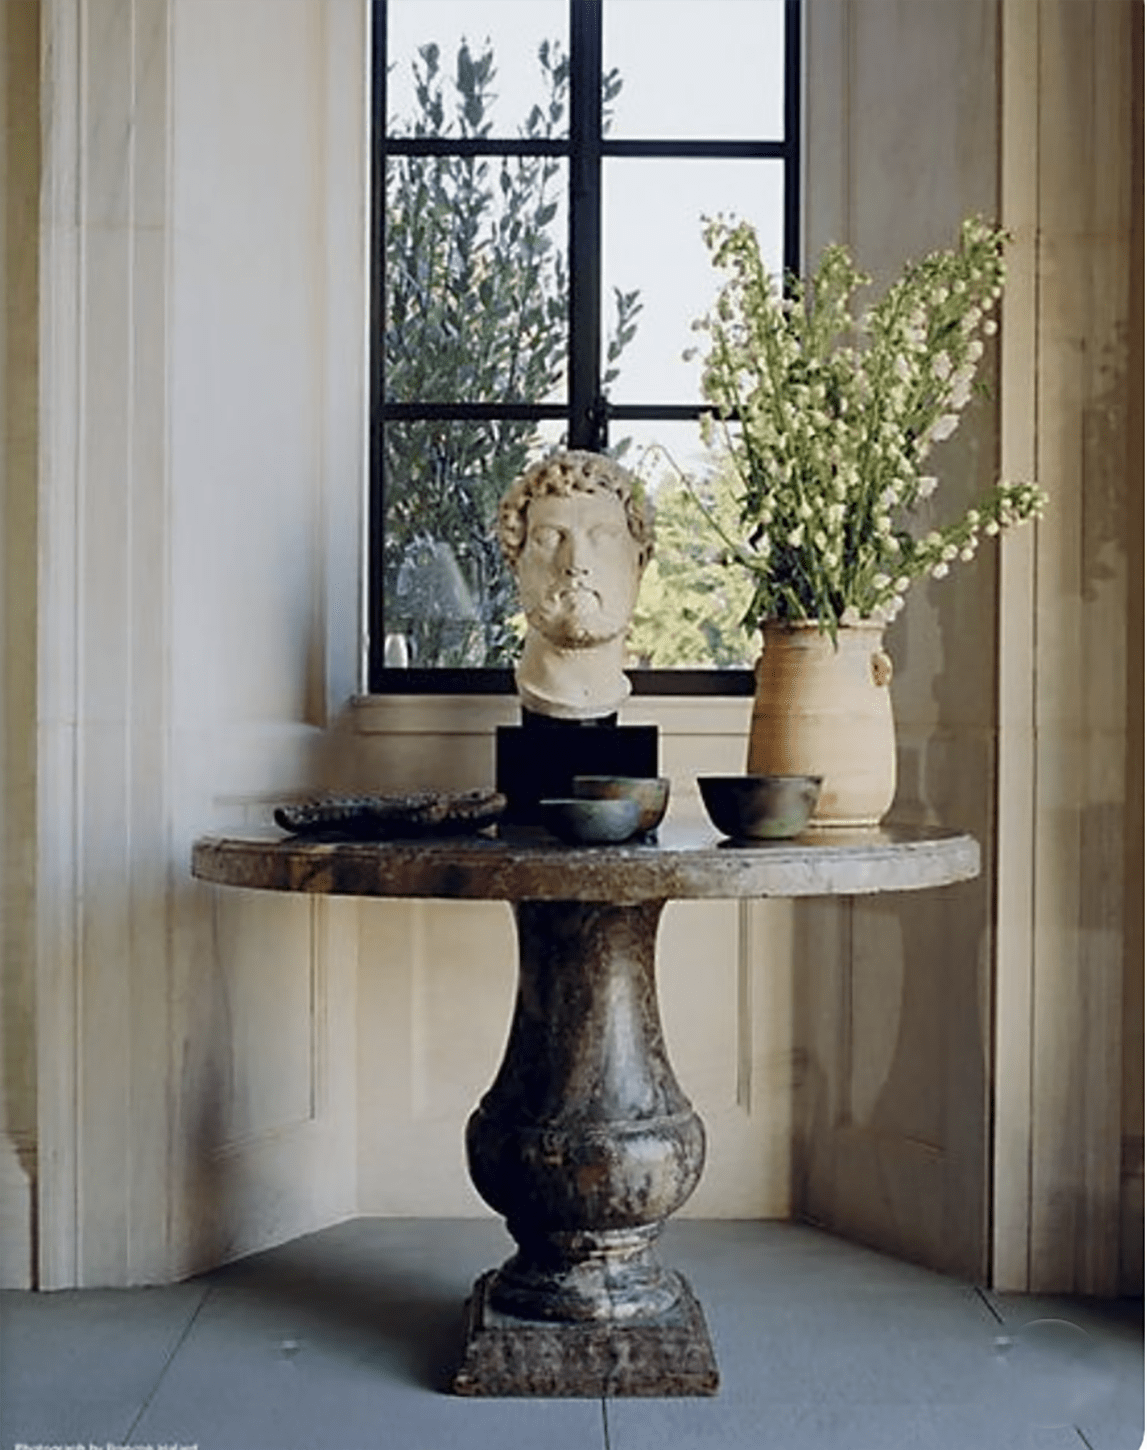 Styling Round Entry Tables, Round Pedestal Entrance Table